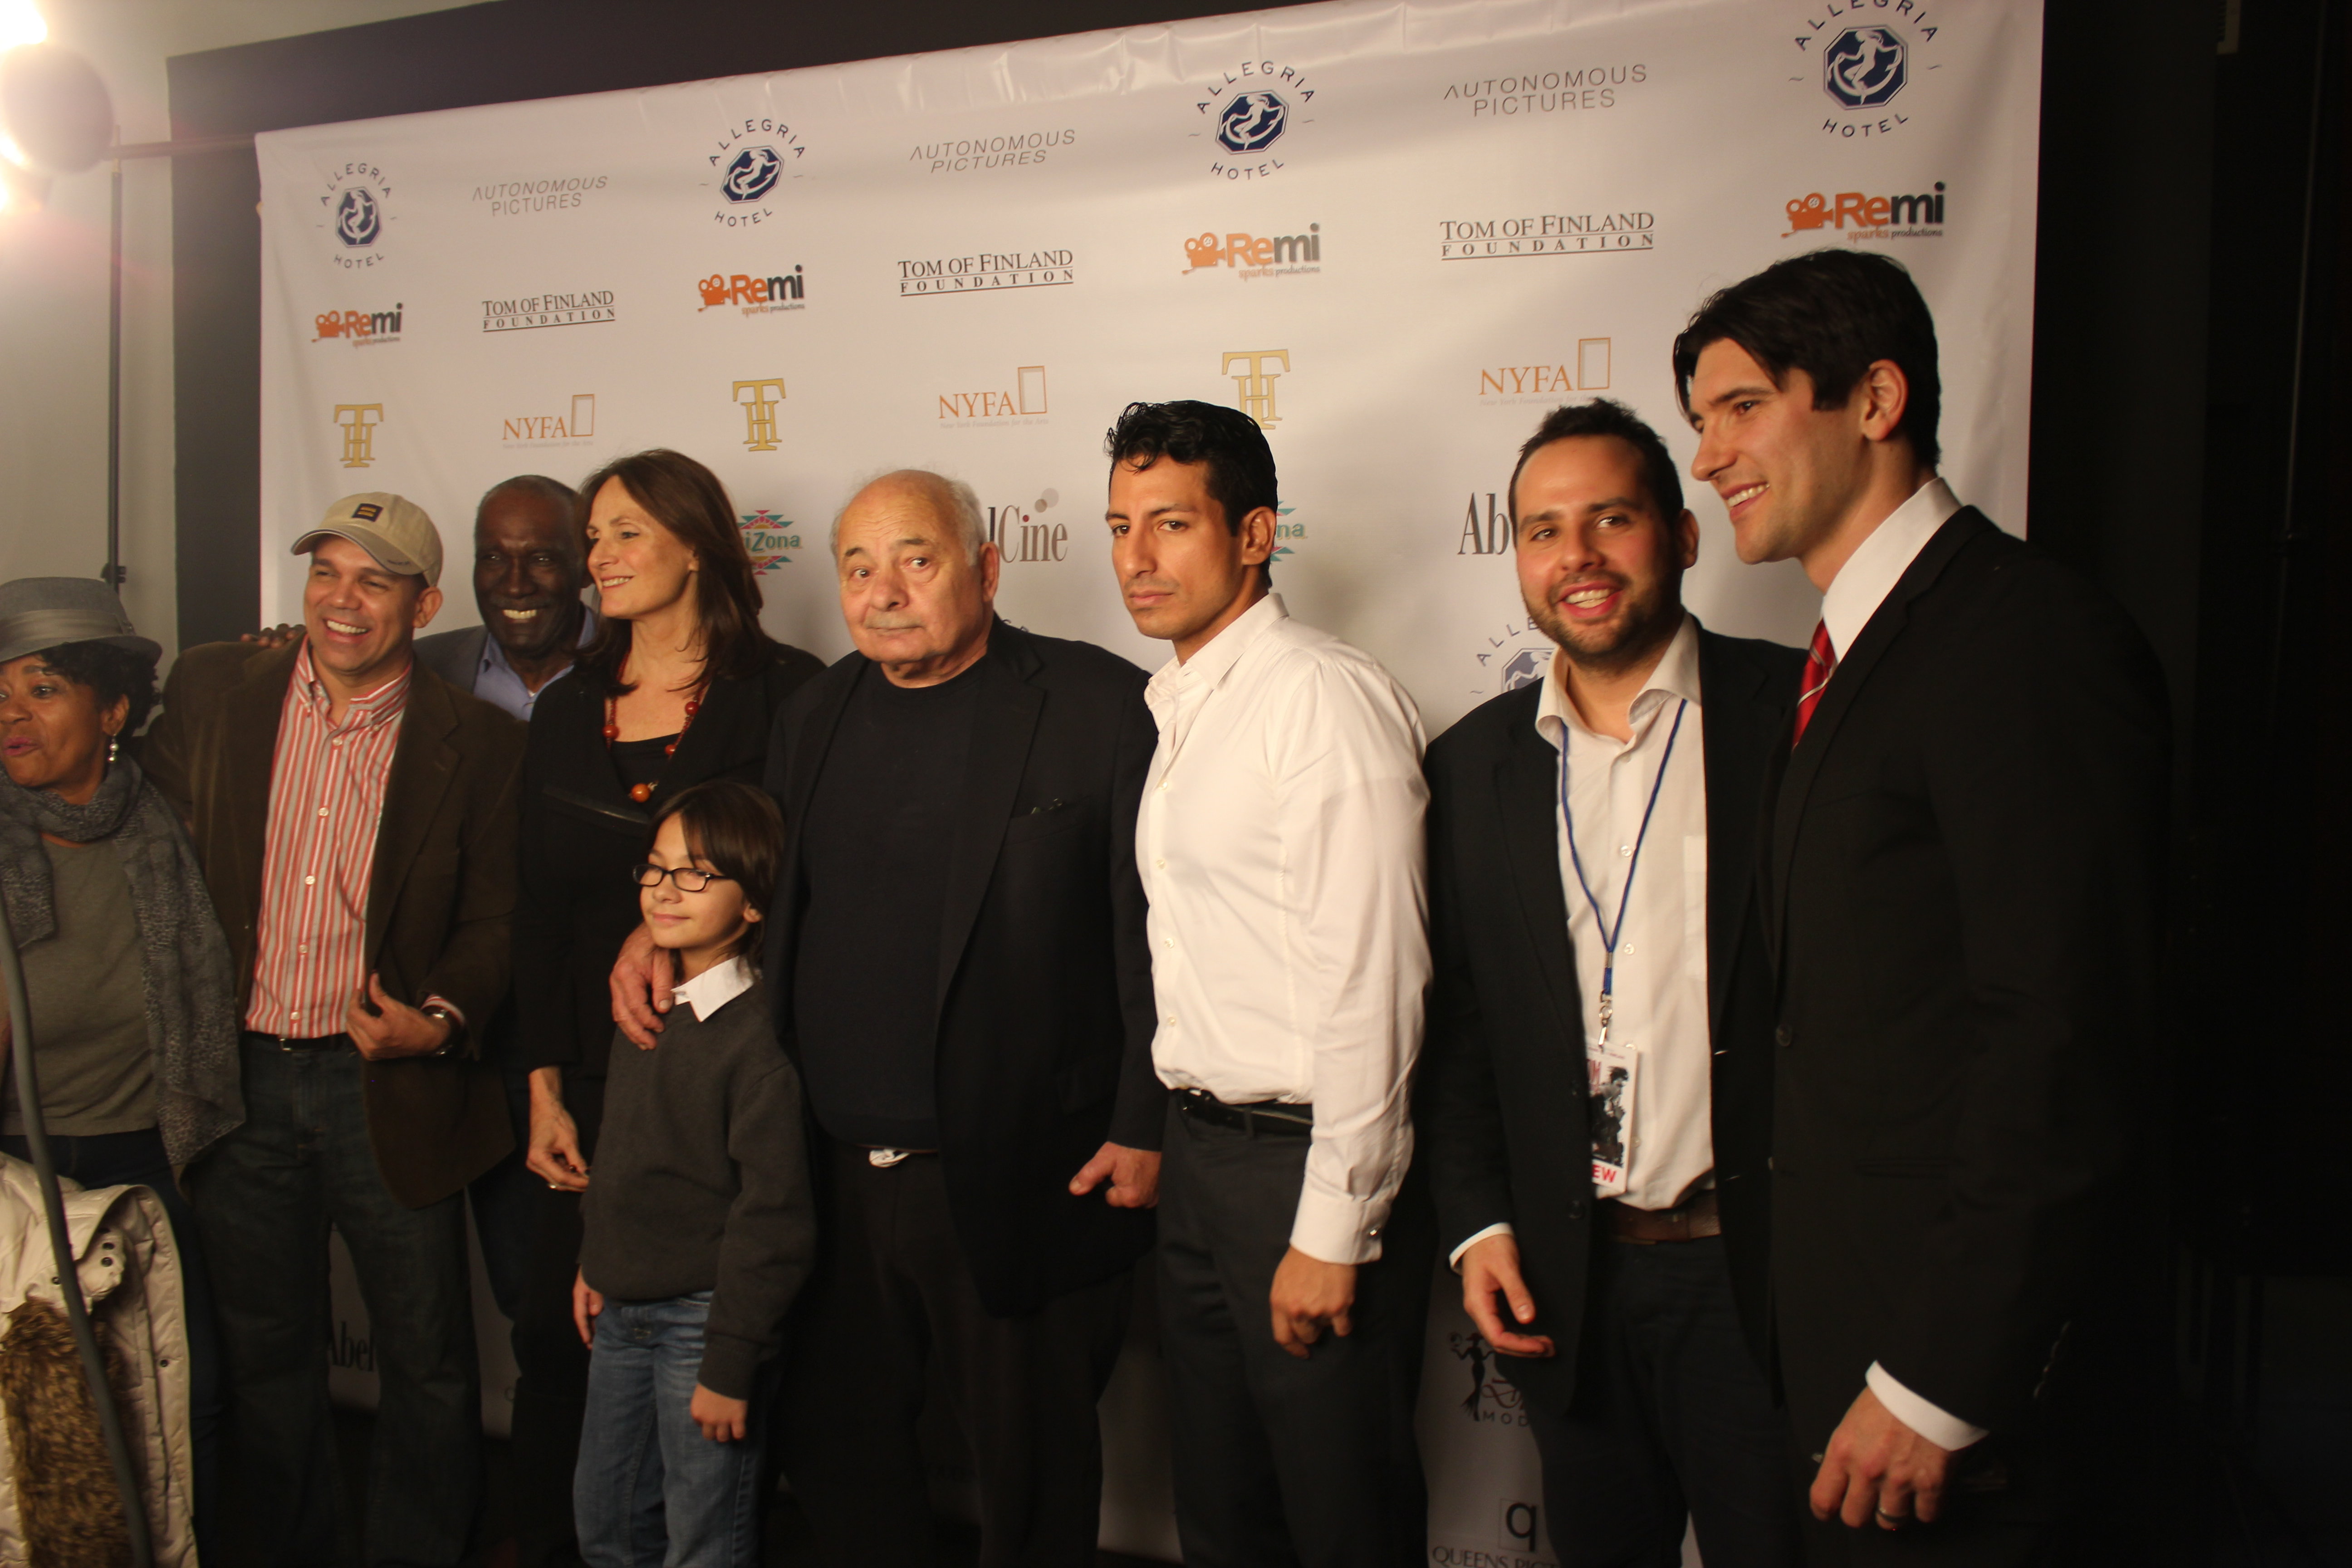 Mireille Bourjolly, Flavio Alves, Laurie Folkes, Dawn Young, Edward Sass, Burt Young, Alex Kruz, Roy Wol, Jacques Mitchell at the NYC premiere of Tom in America at the Cantor Film Center (2014).